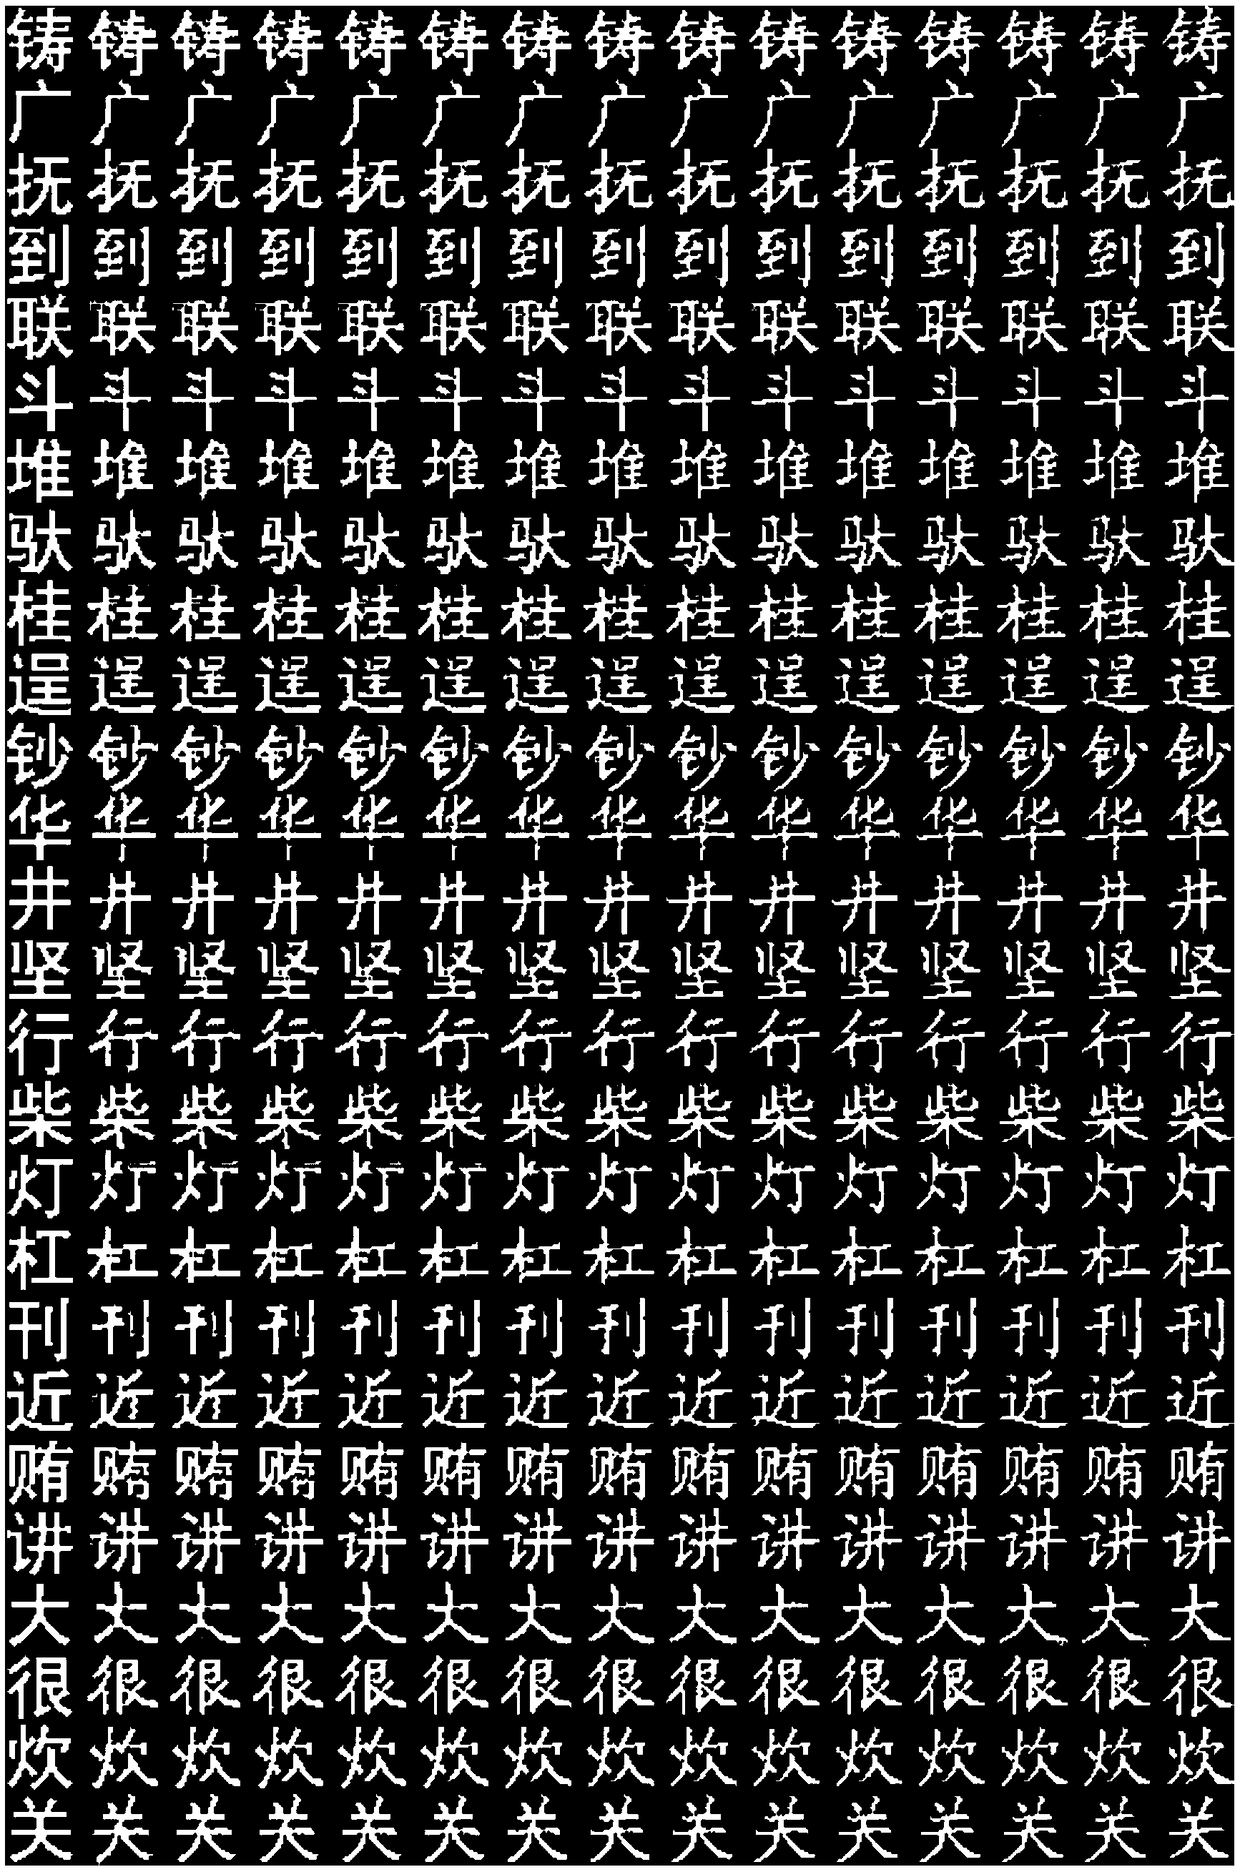 Chinese character font generation method based on conditional generation antagonistic network